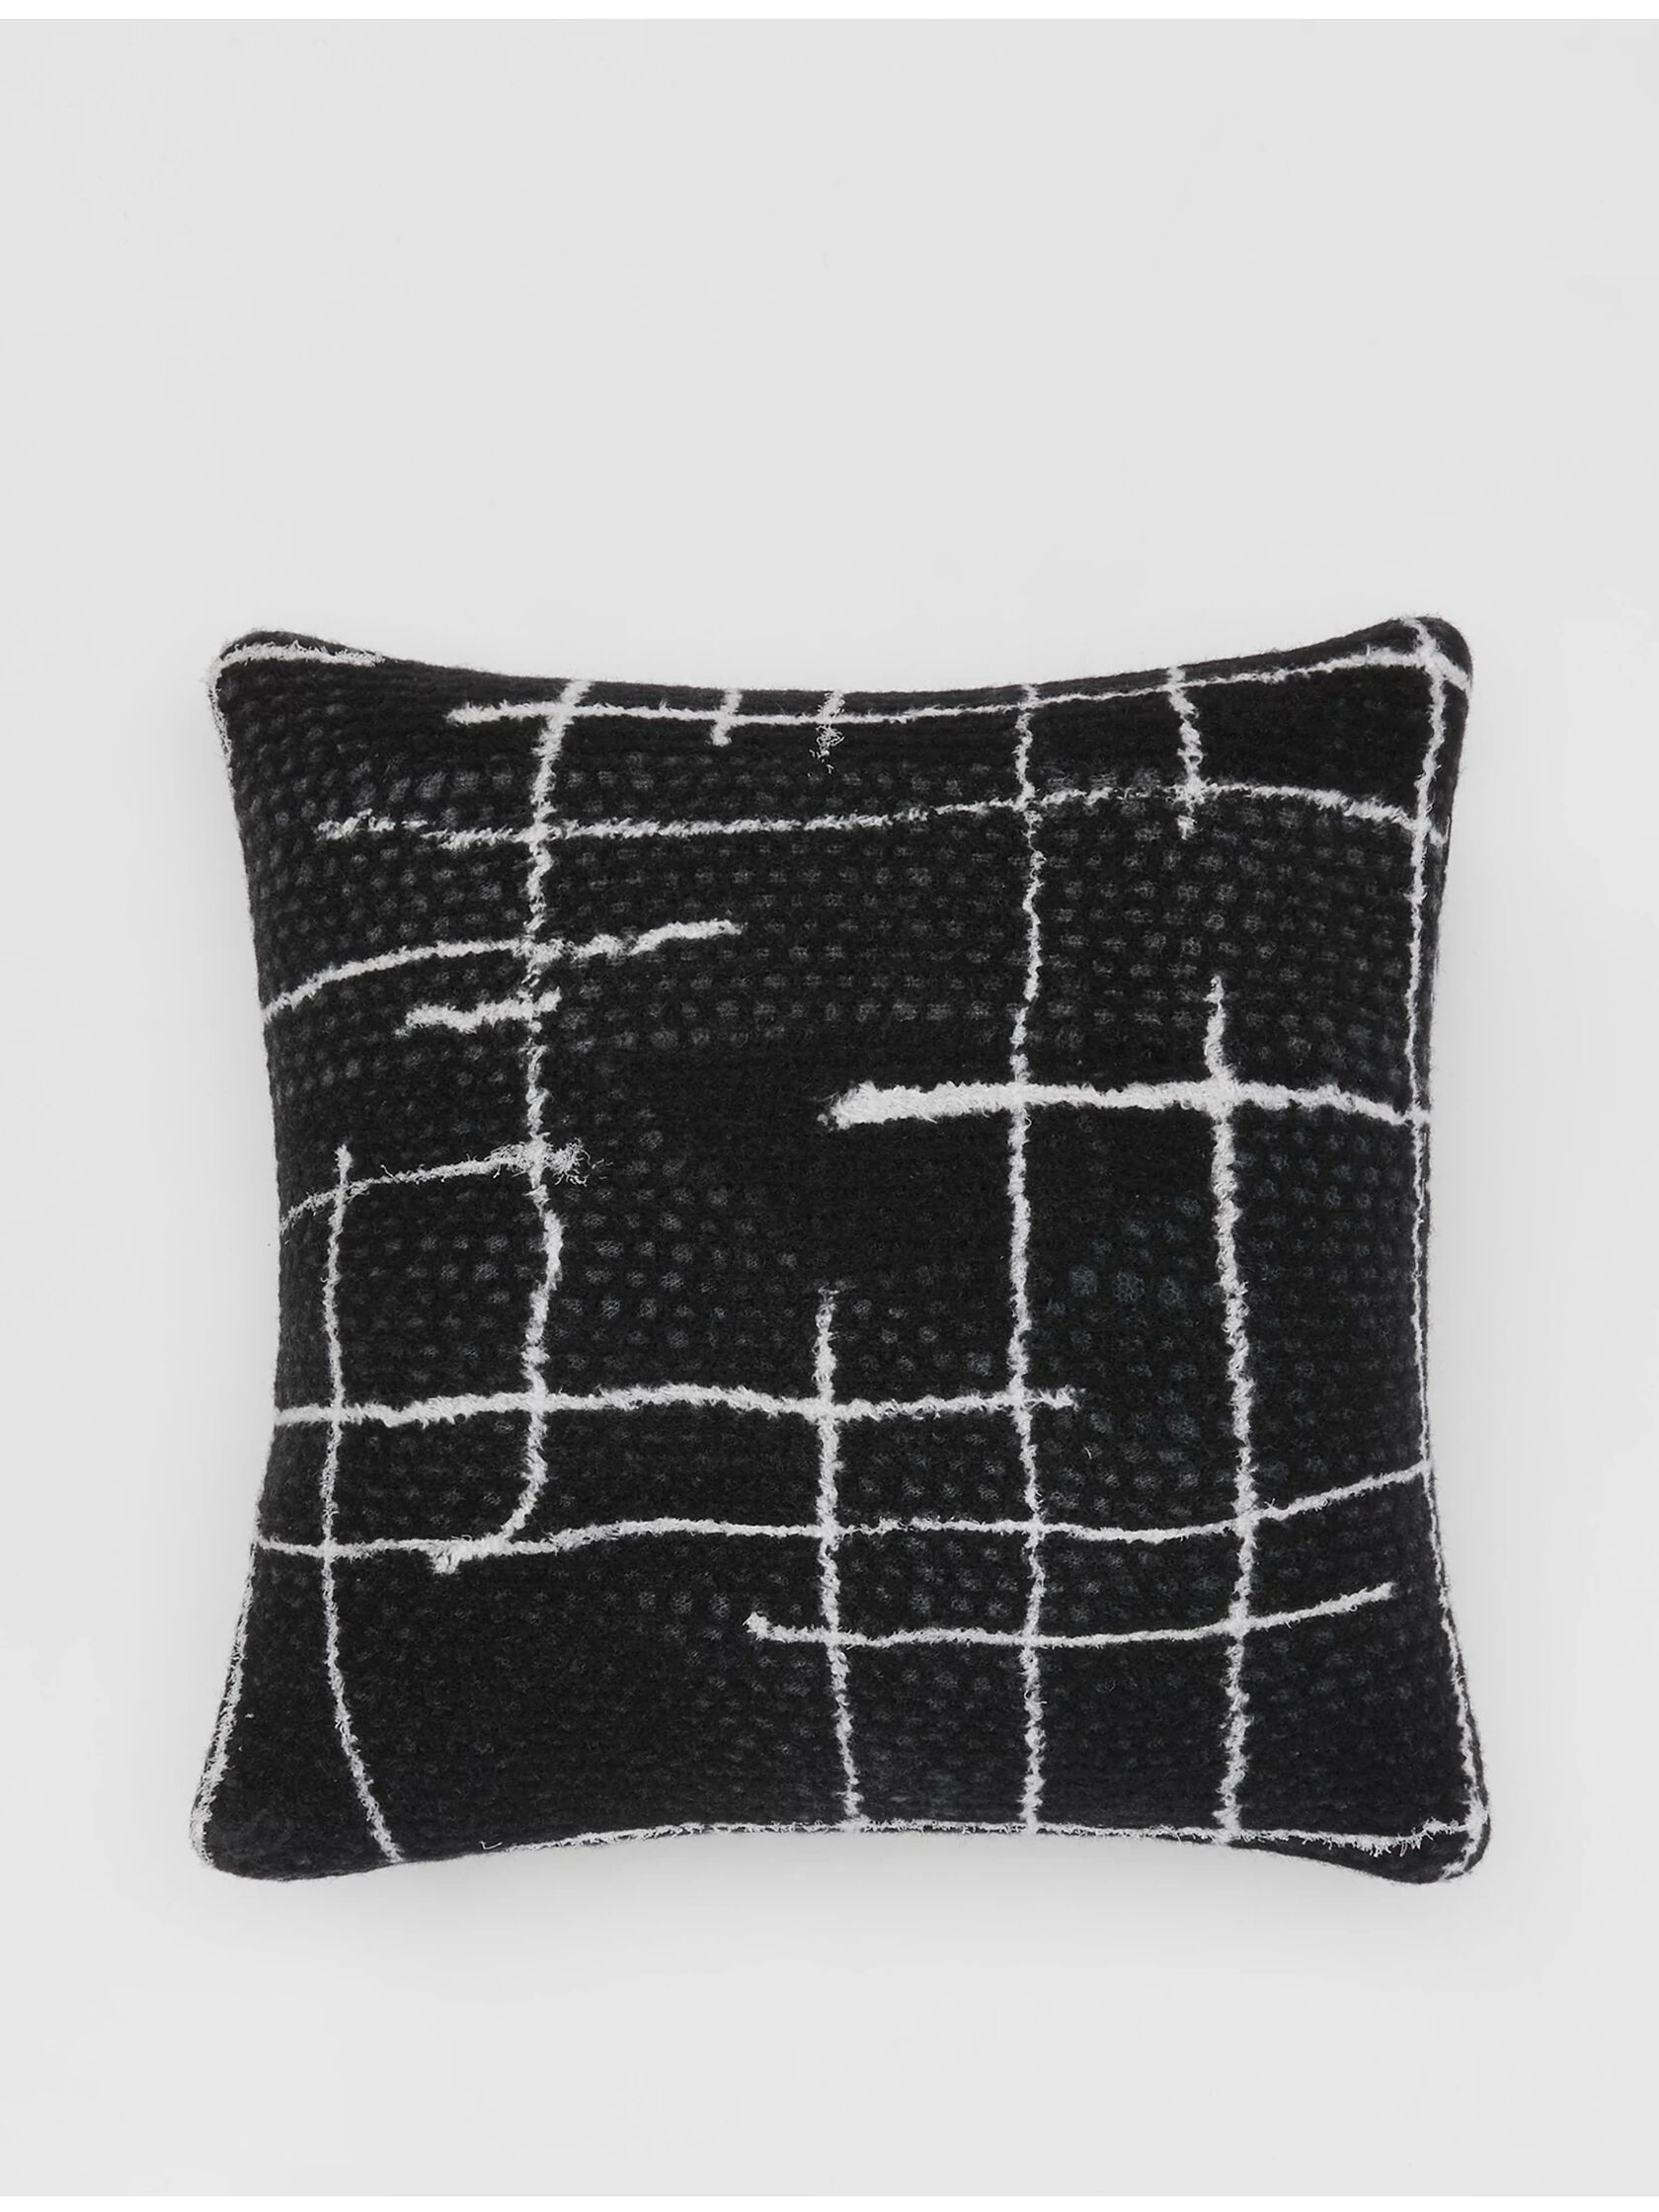 Waste No More Felted Artisanal Pillow, 11" by 11"